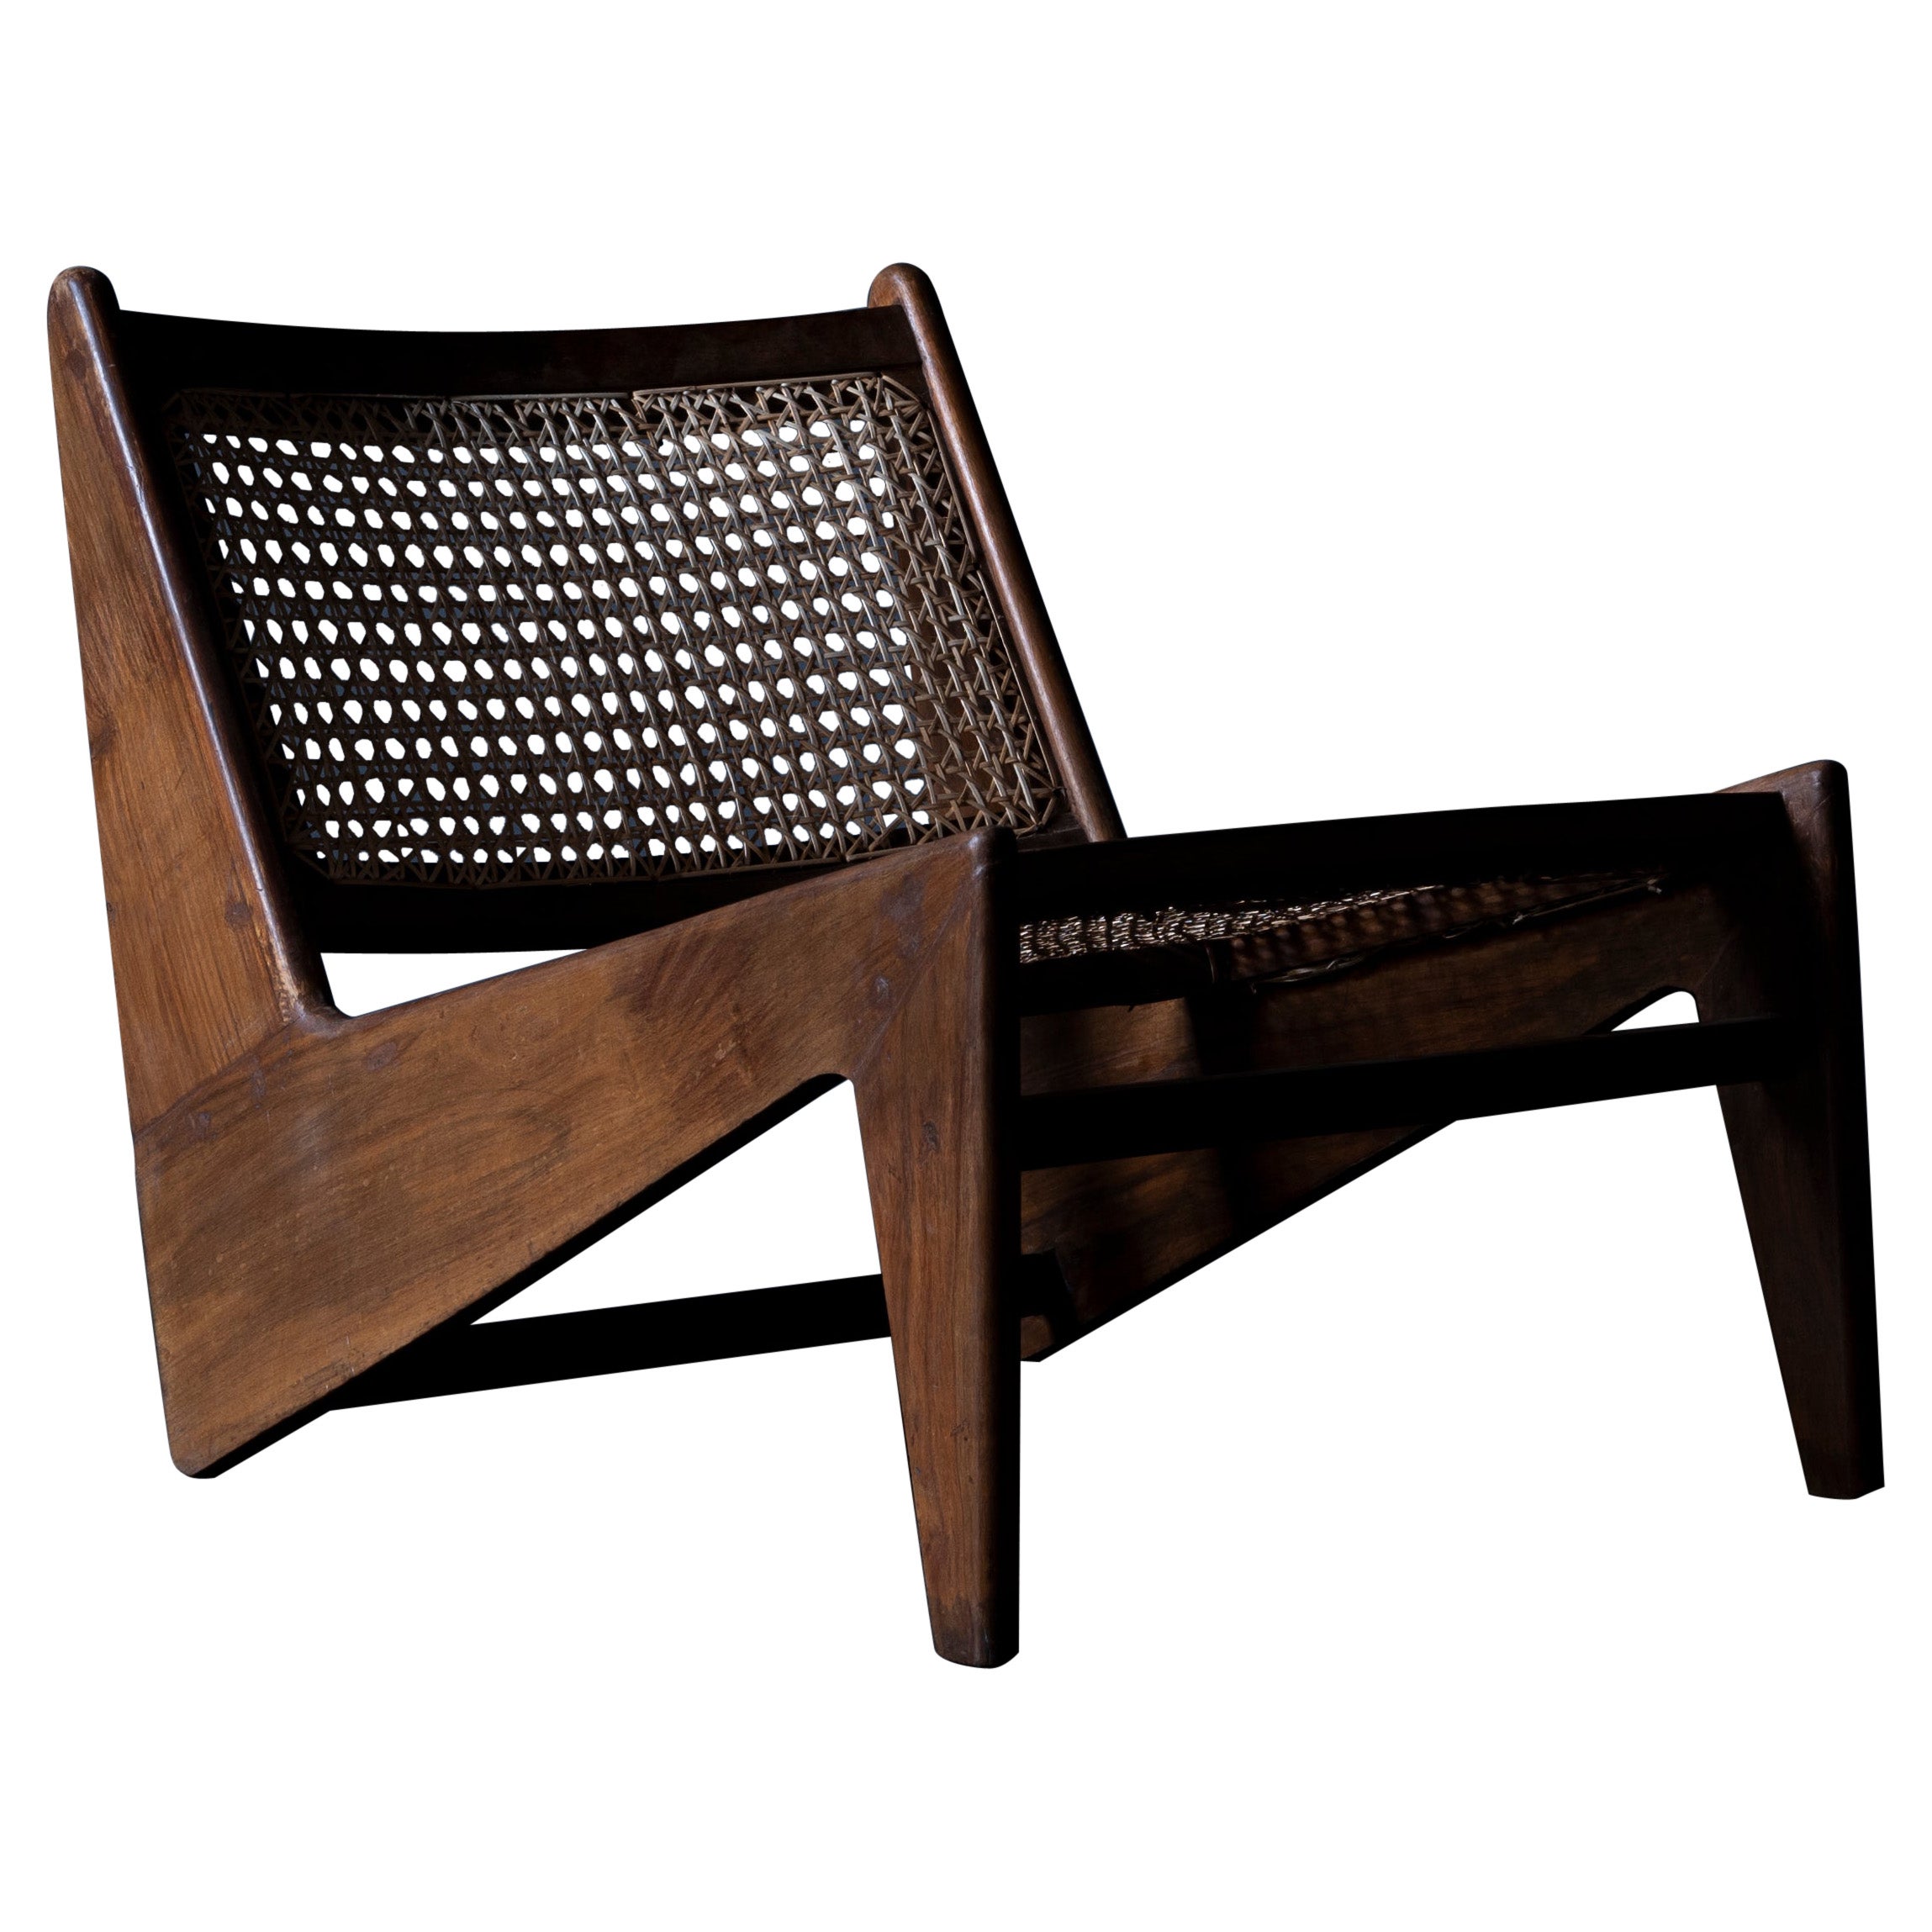 Pierre Jeanneret Kangaroo Chair, Circa 1950s, Chandigarh, India For Sale